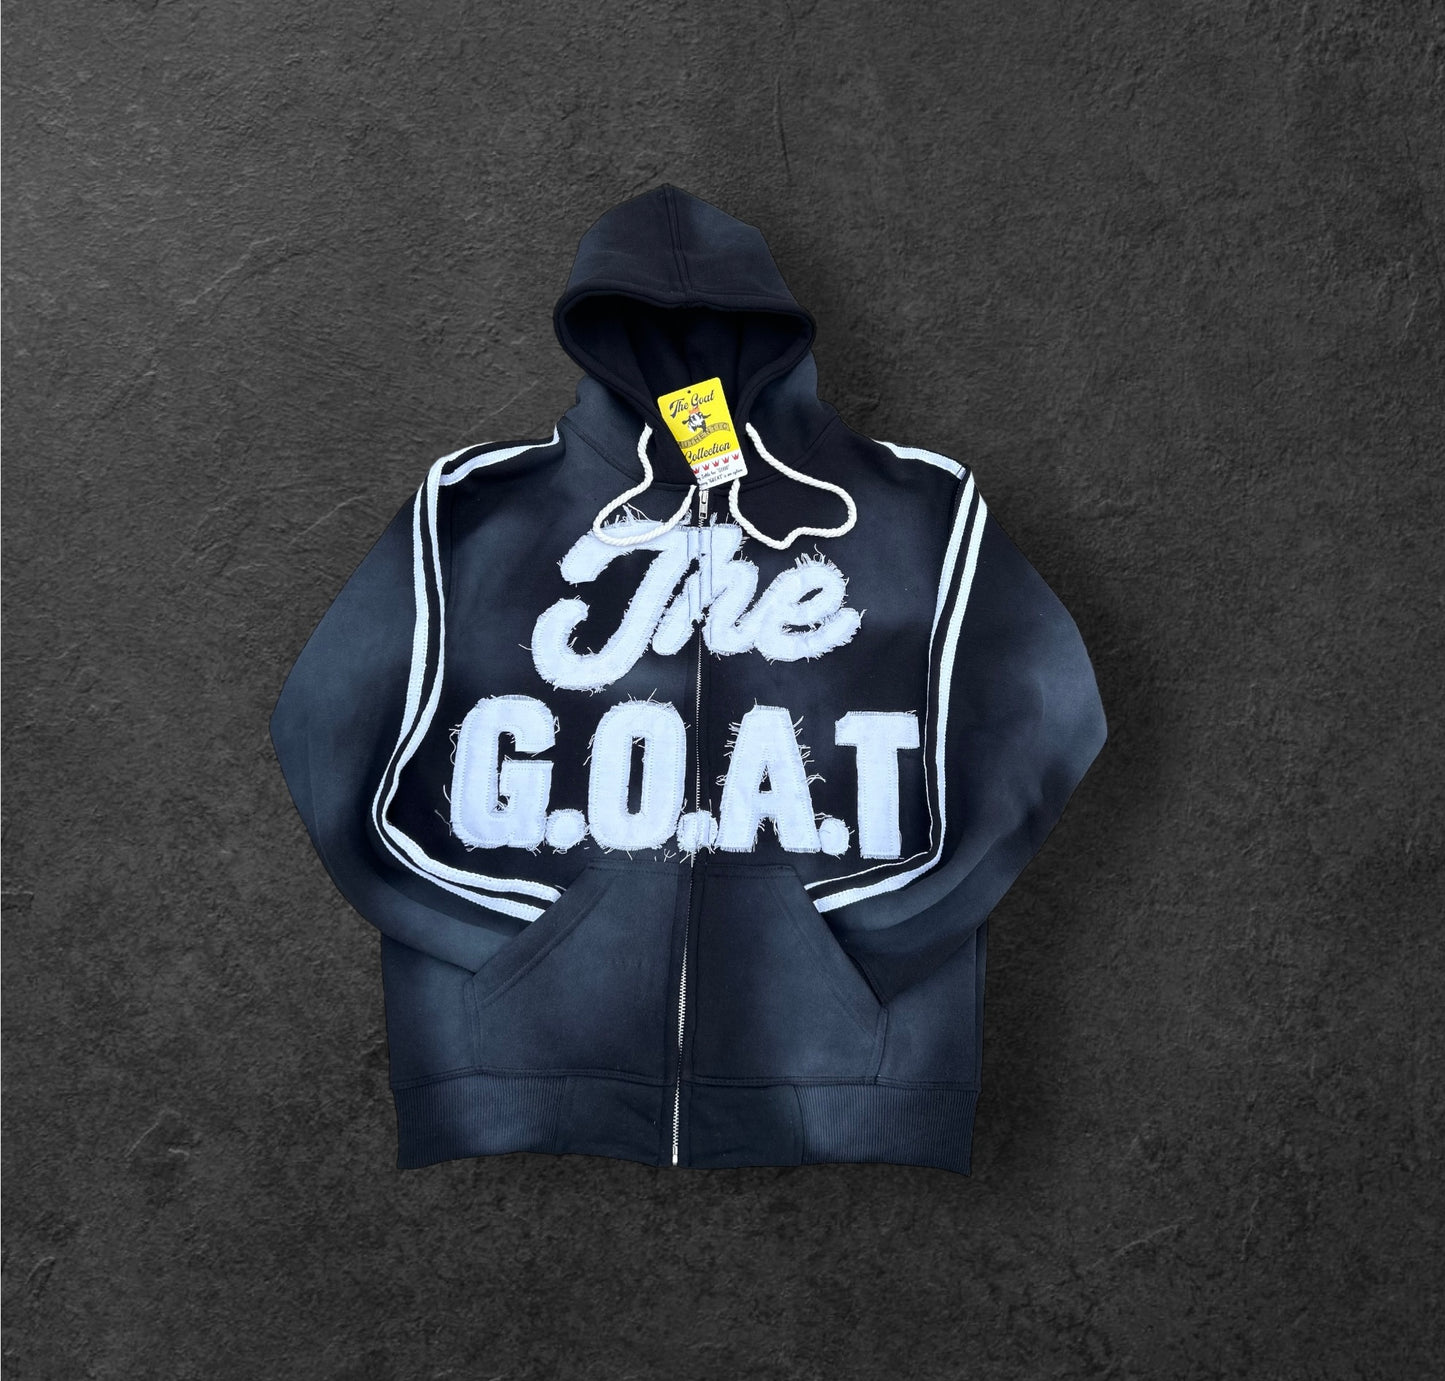 BLACK & WHITE THE G.O.A.T DISTRESSED SUN FADE ZIPUP HOODIE SETS.